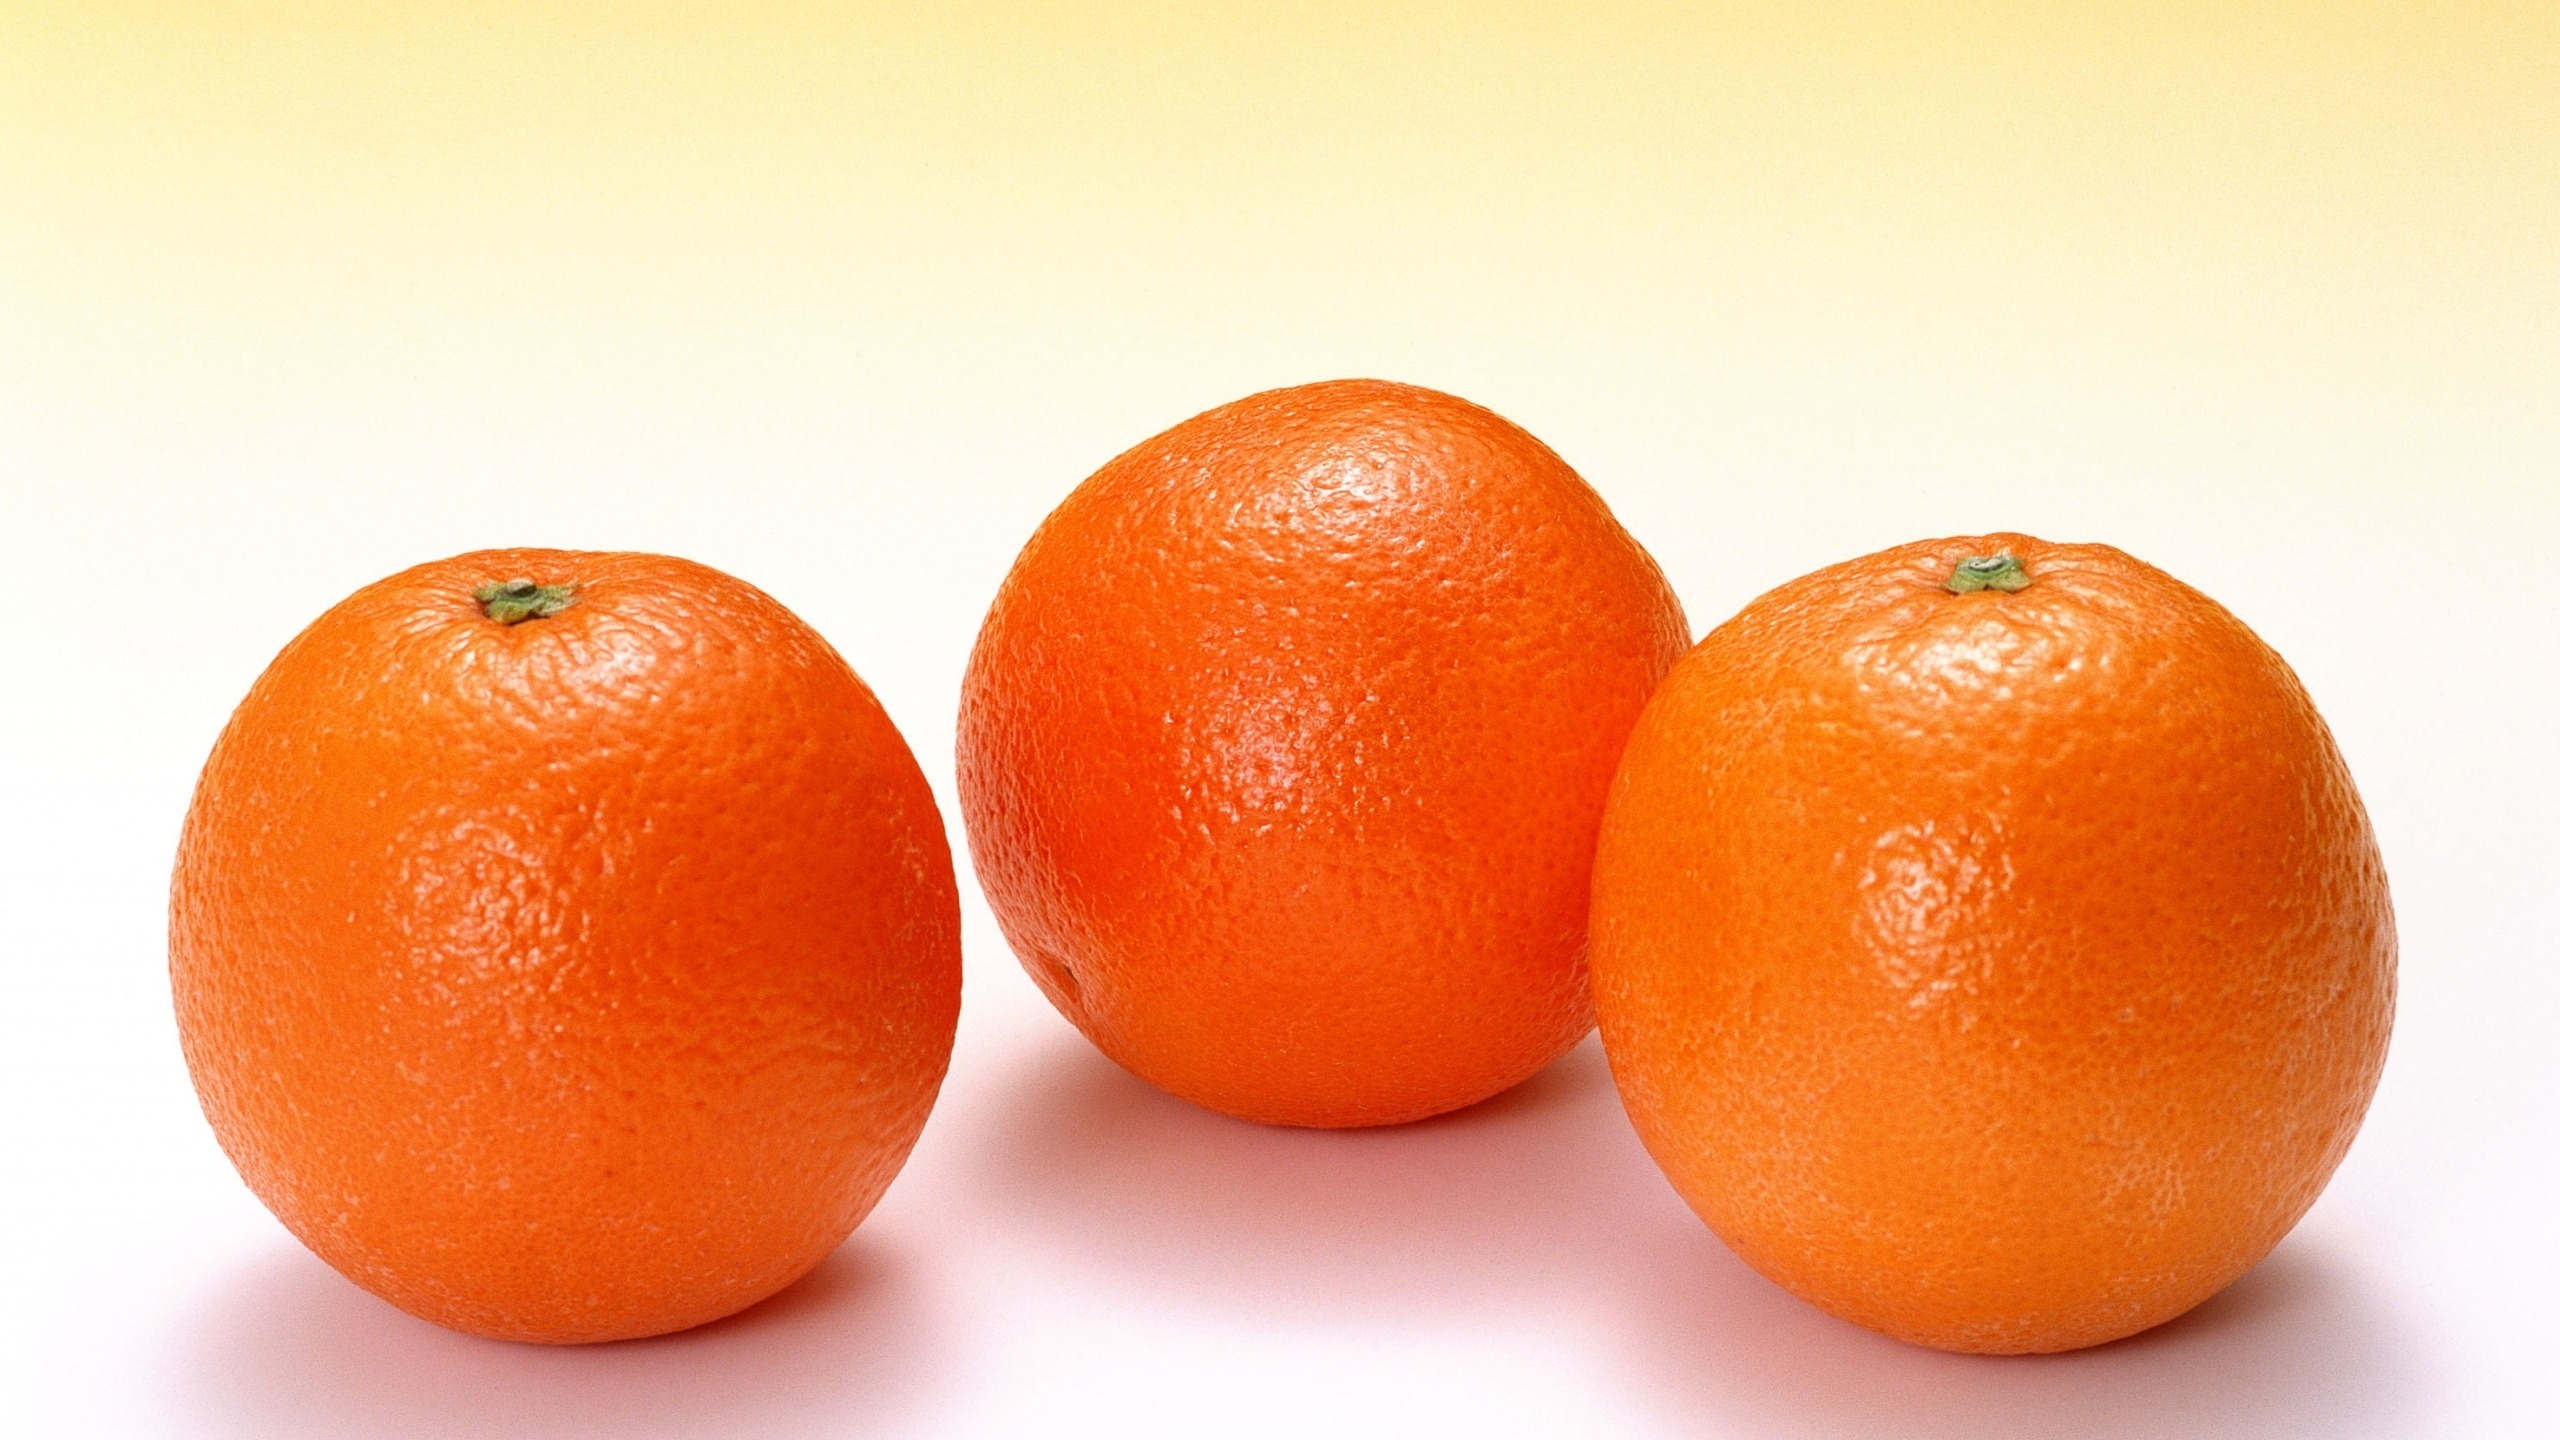 Juicy Oranges for 2560x1440 HDTV resolution